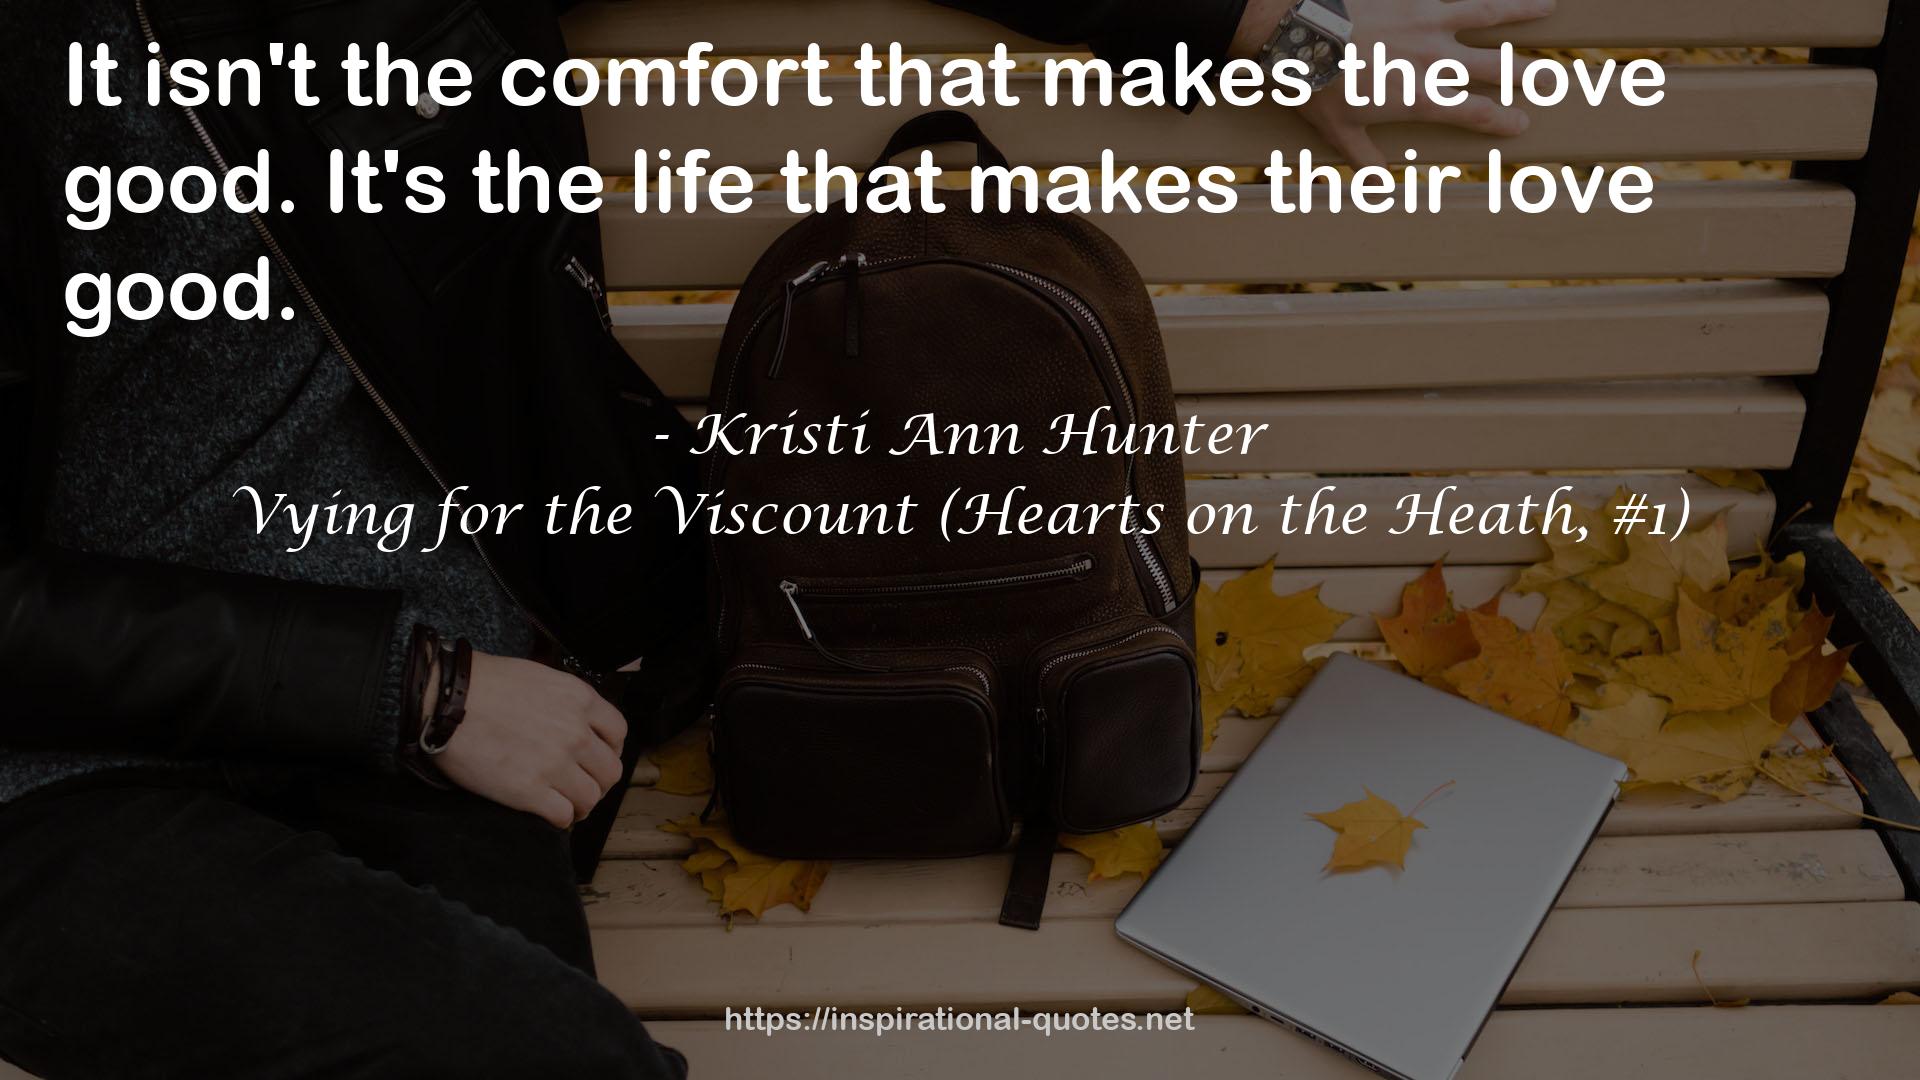 Vying for the Viscount (Hearts on the Heath, #1) QUOTES